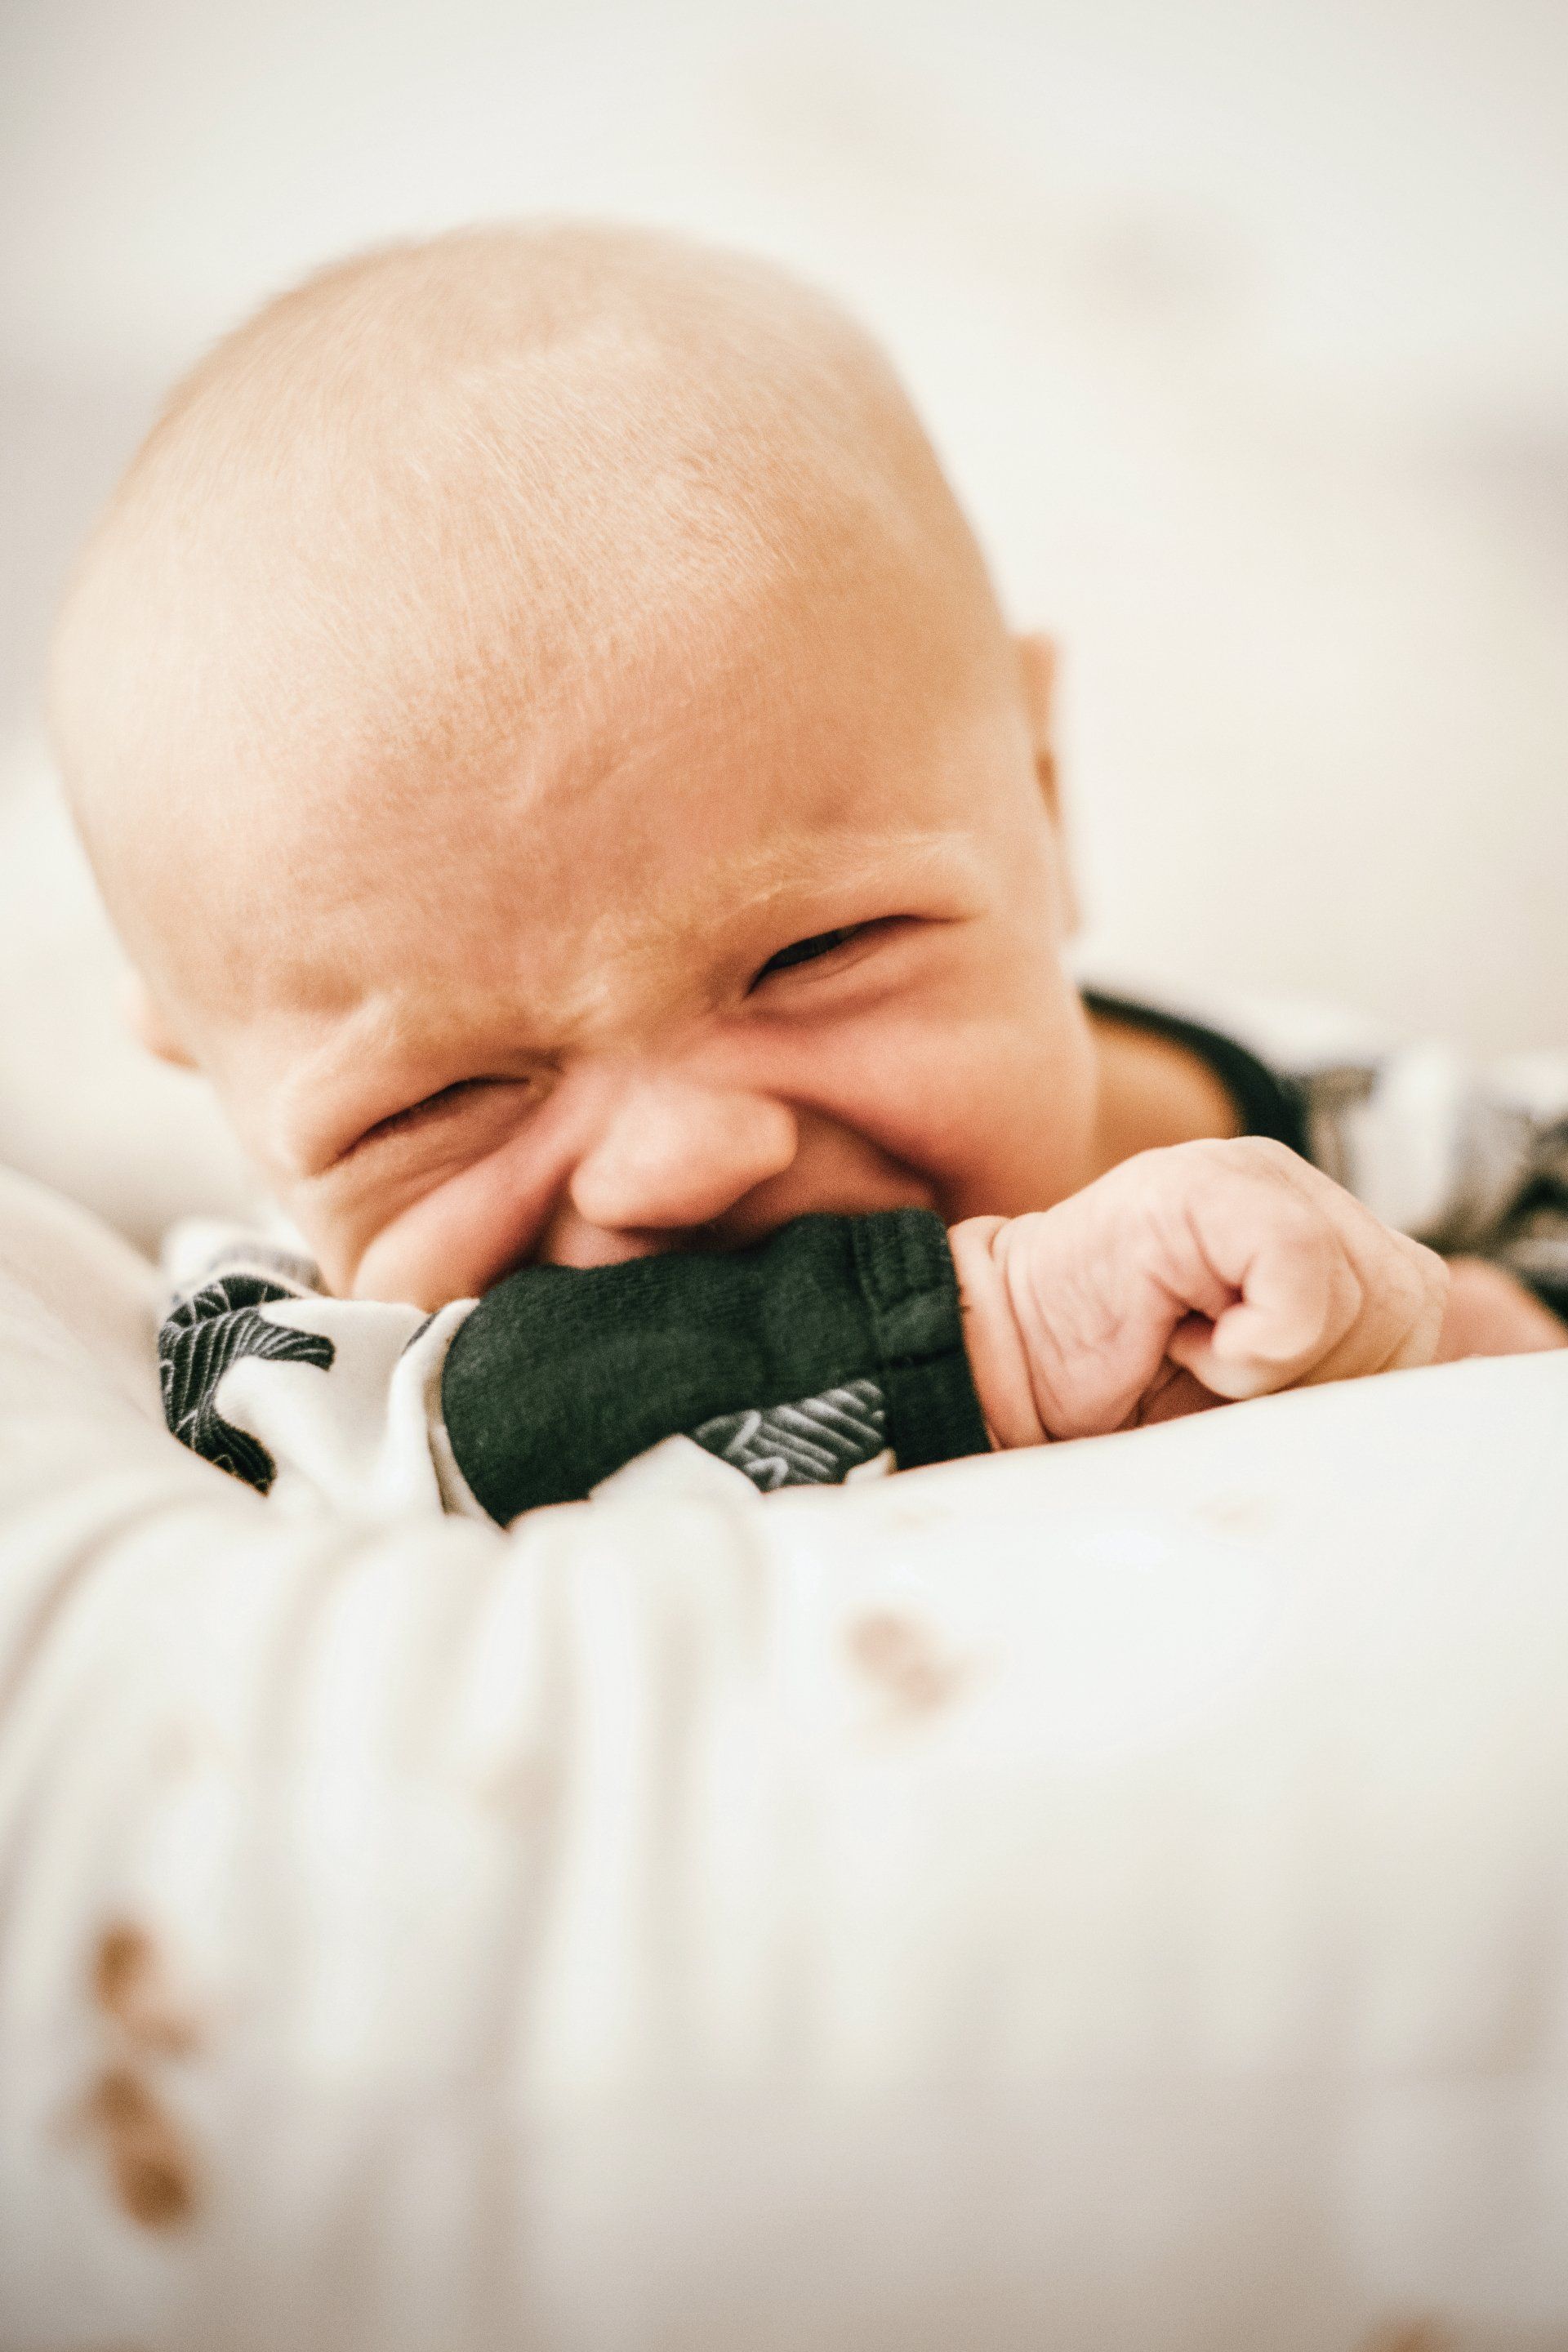 3 Signs That Could Mean Your Baby Is Teething